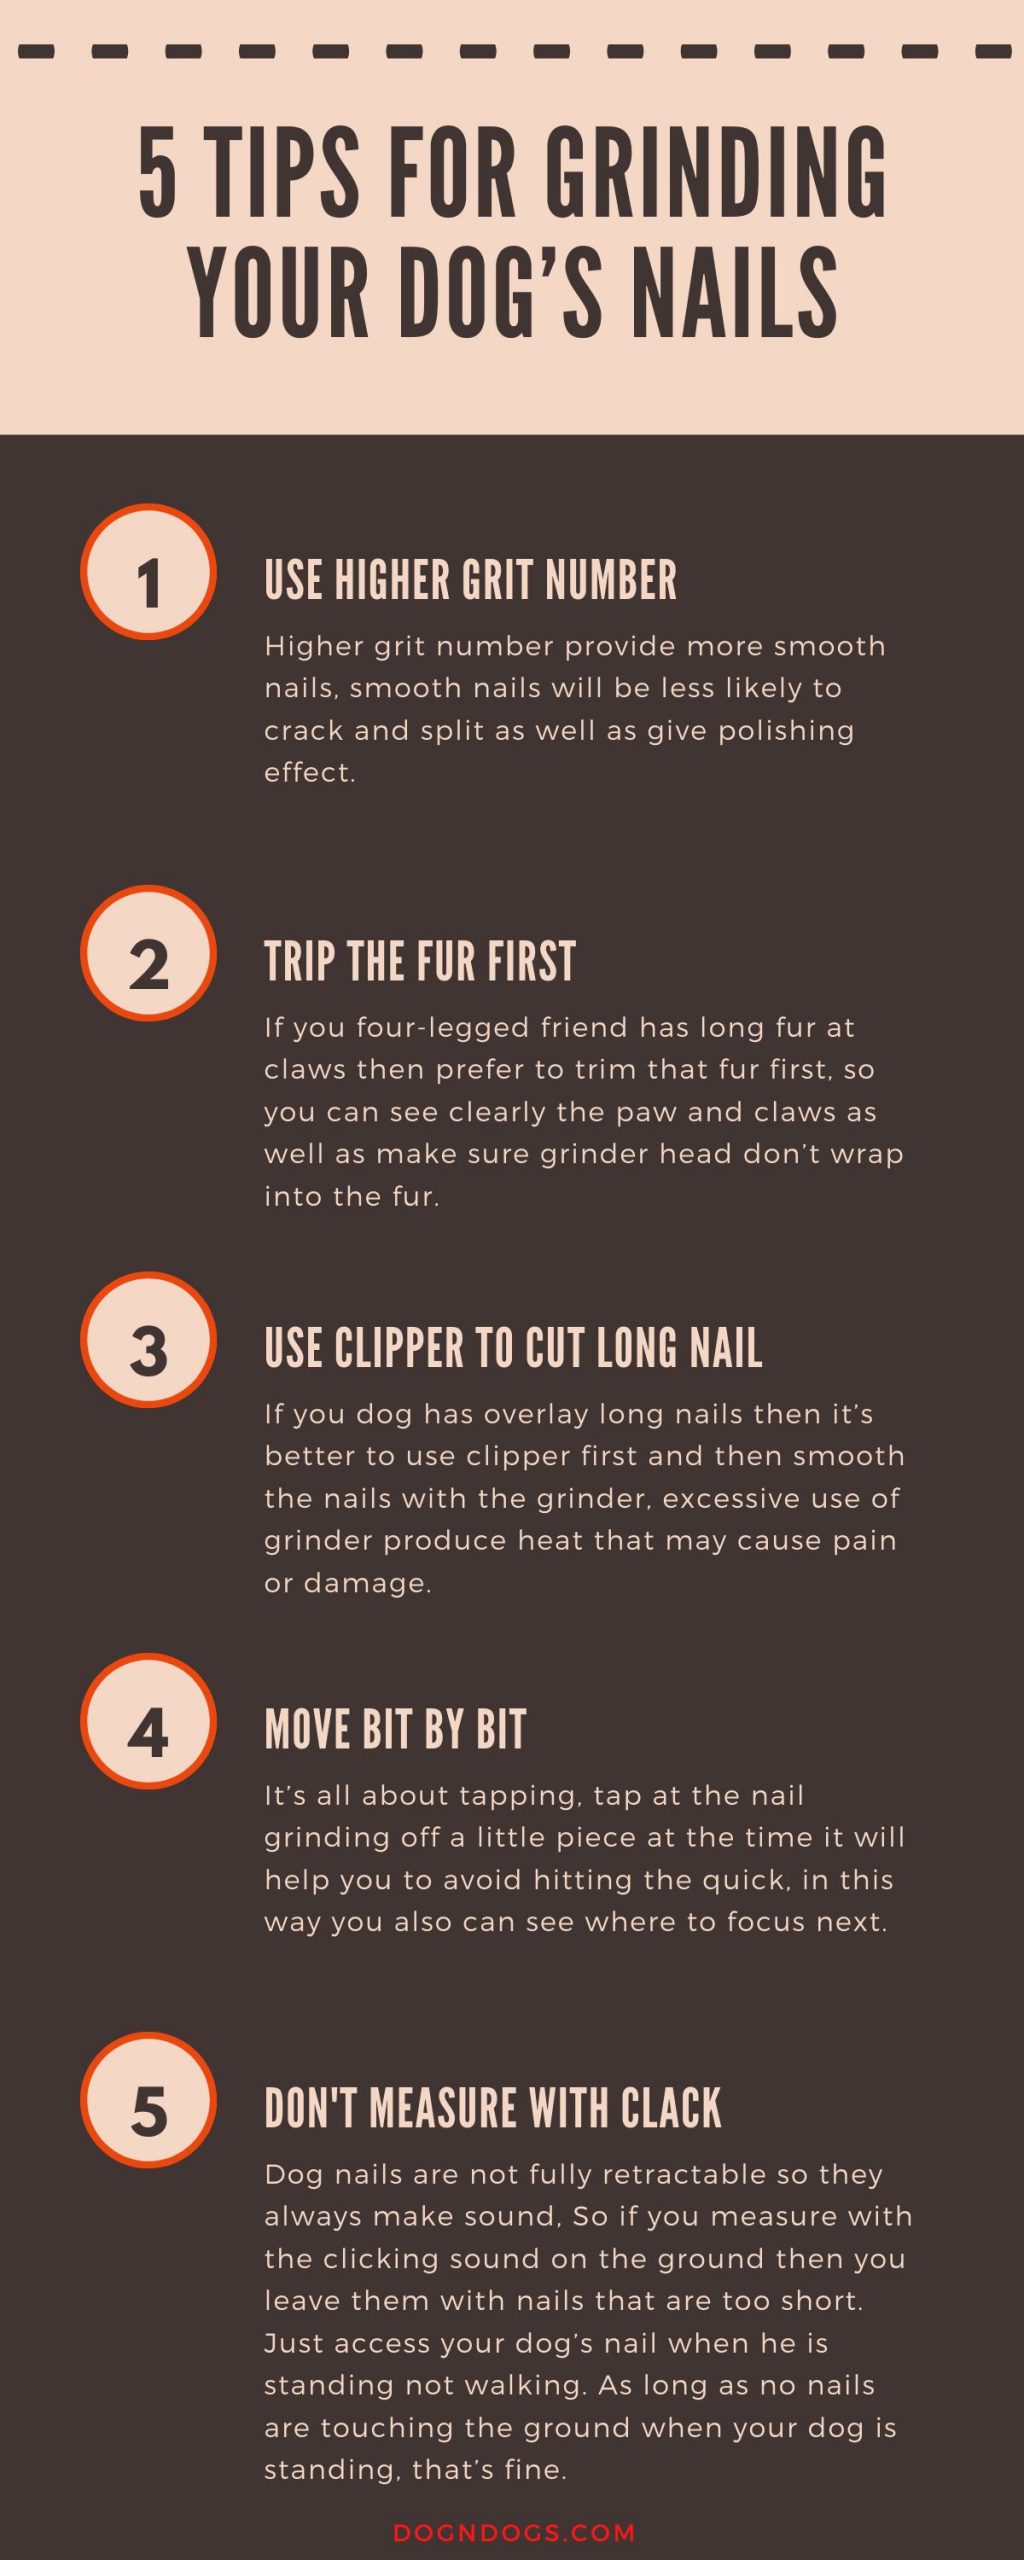 5 tips for grinding your dog's nail